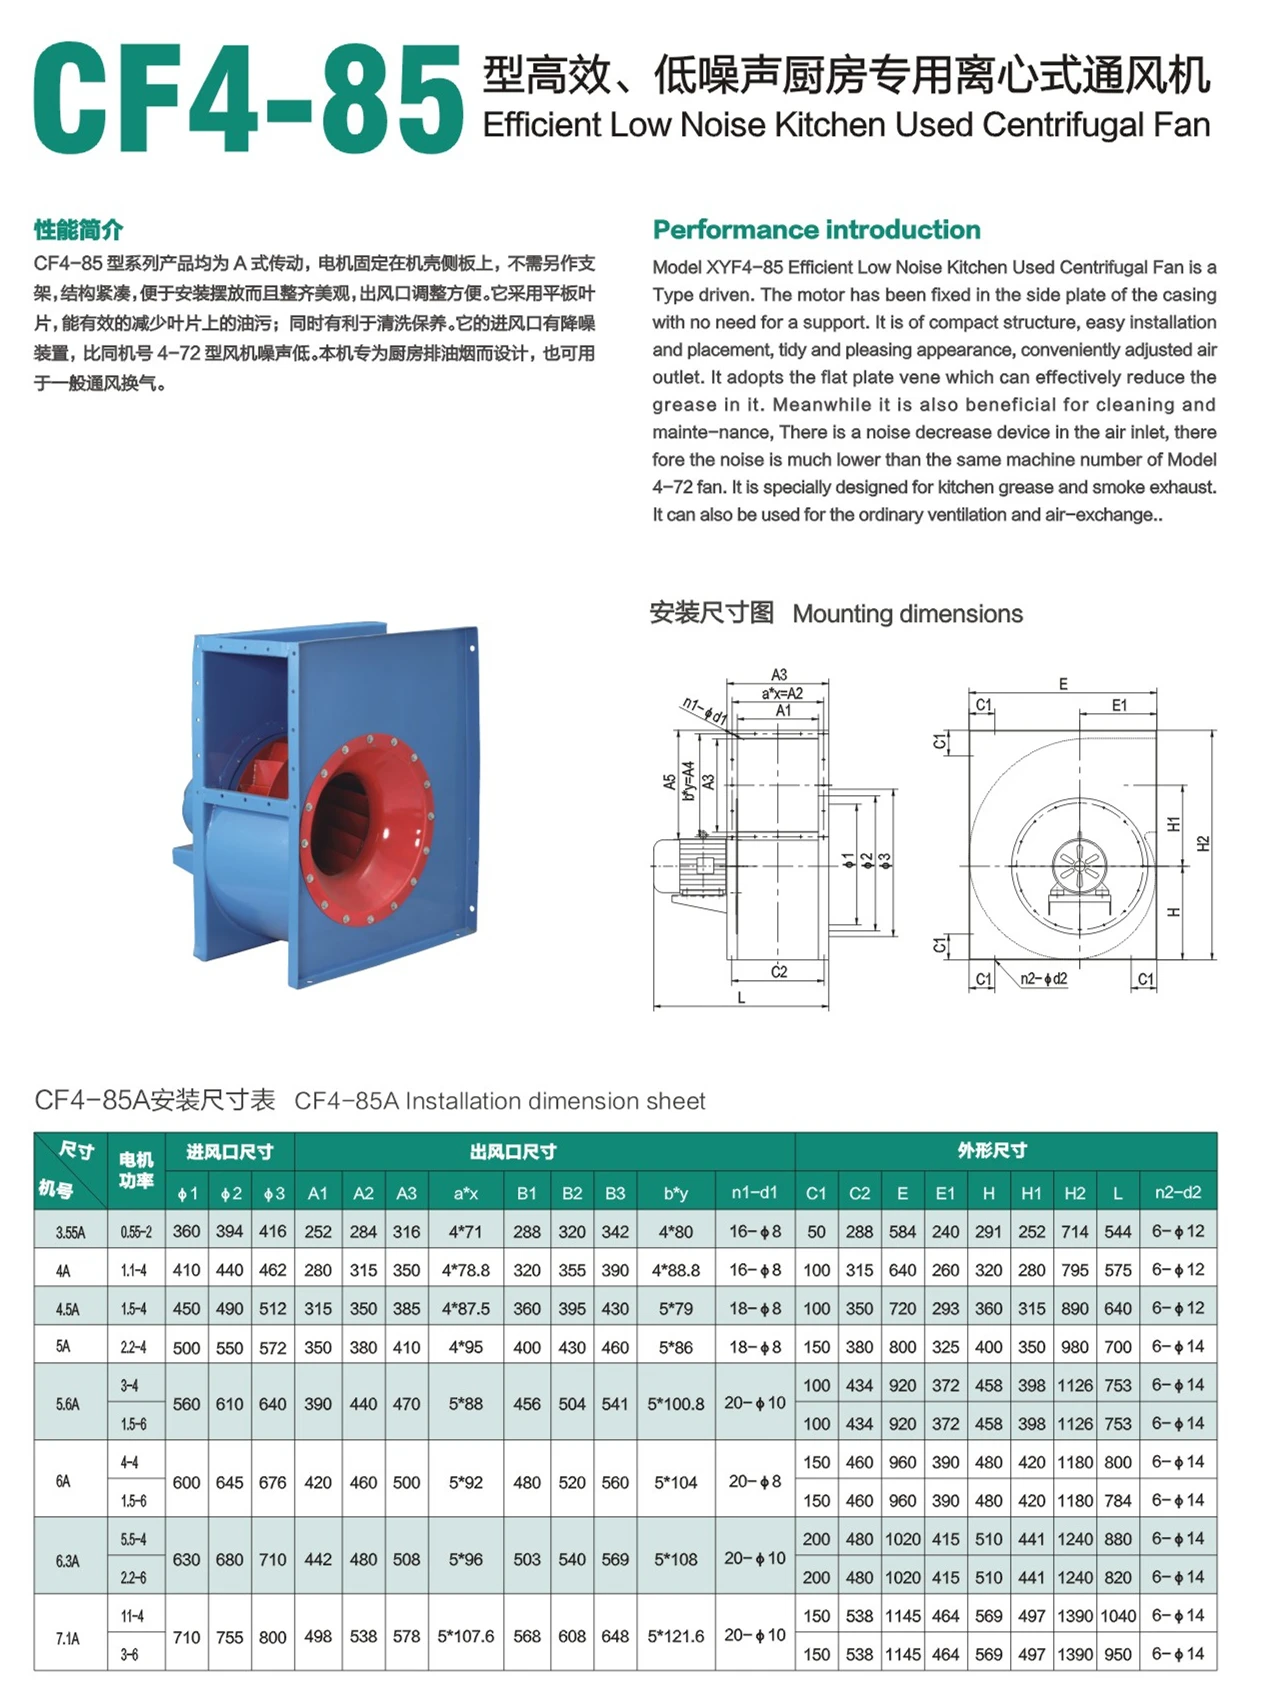 CF4-85 EFFICIENT LOW NOISE KICHEN USED CENTRIFUGAL FAN